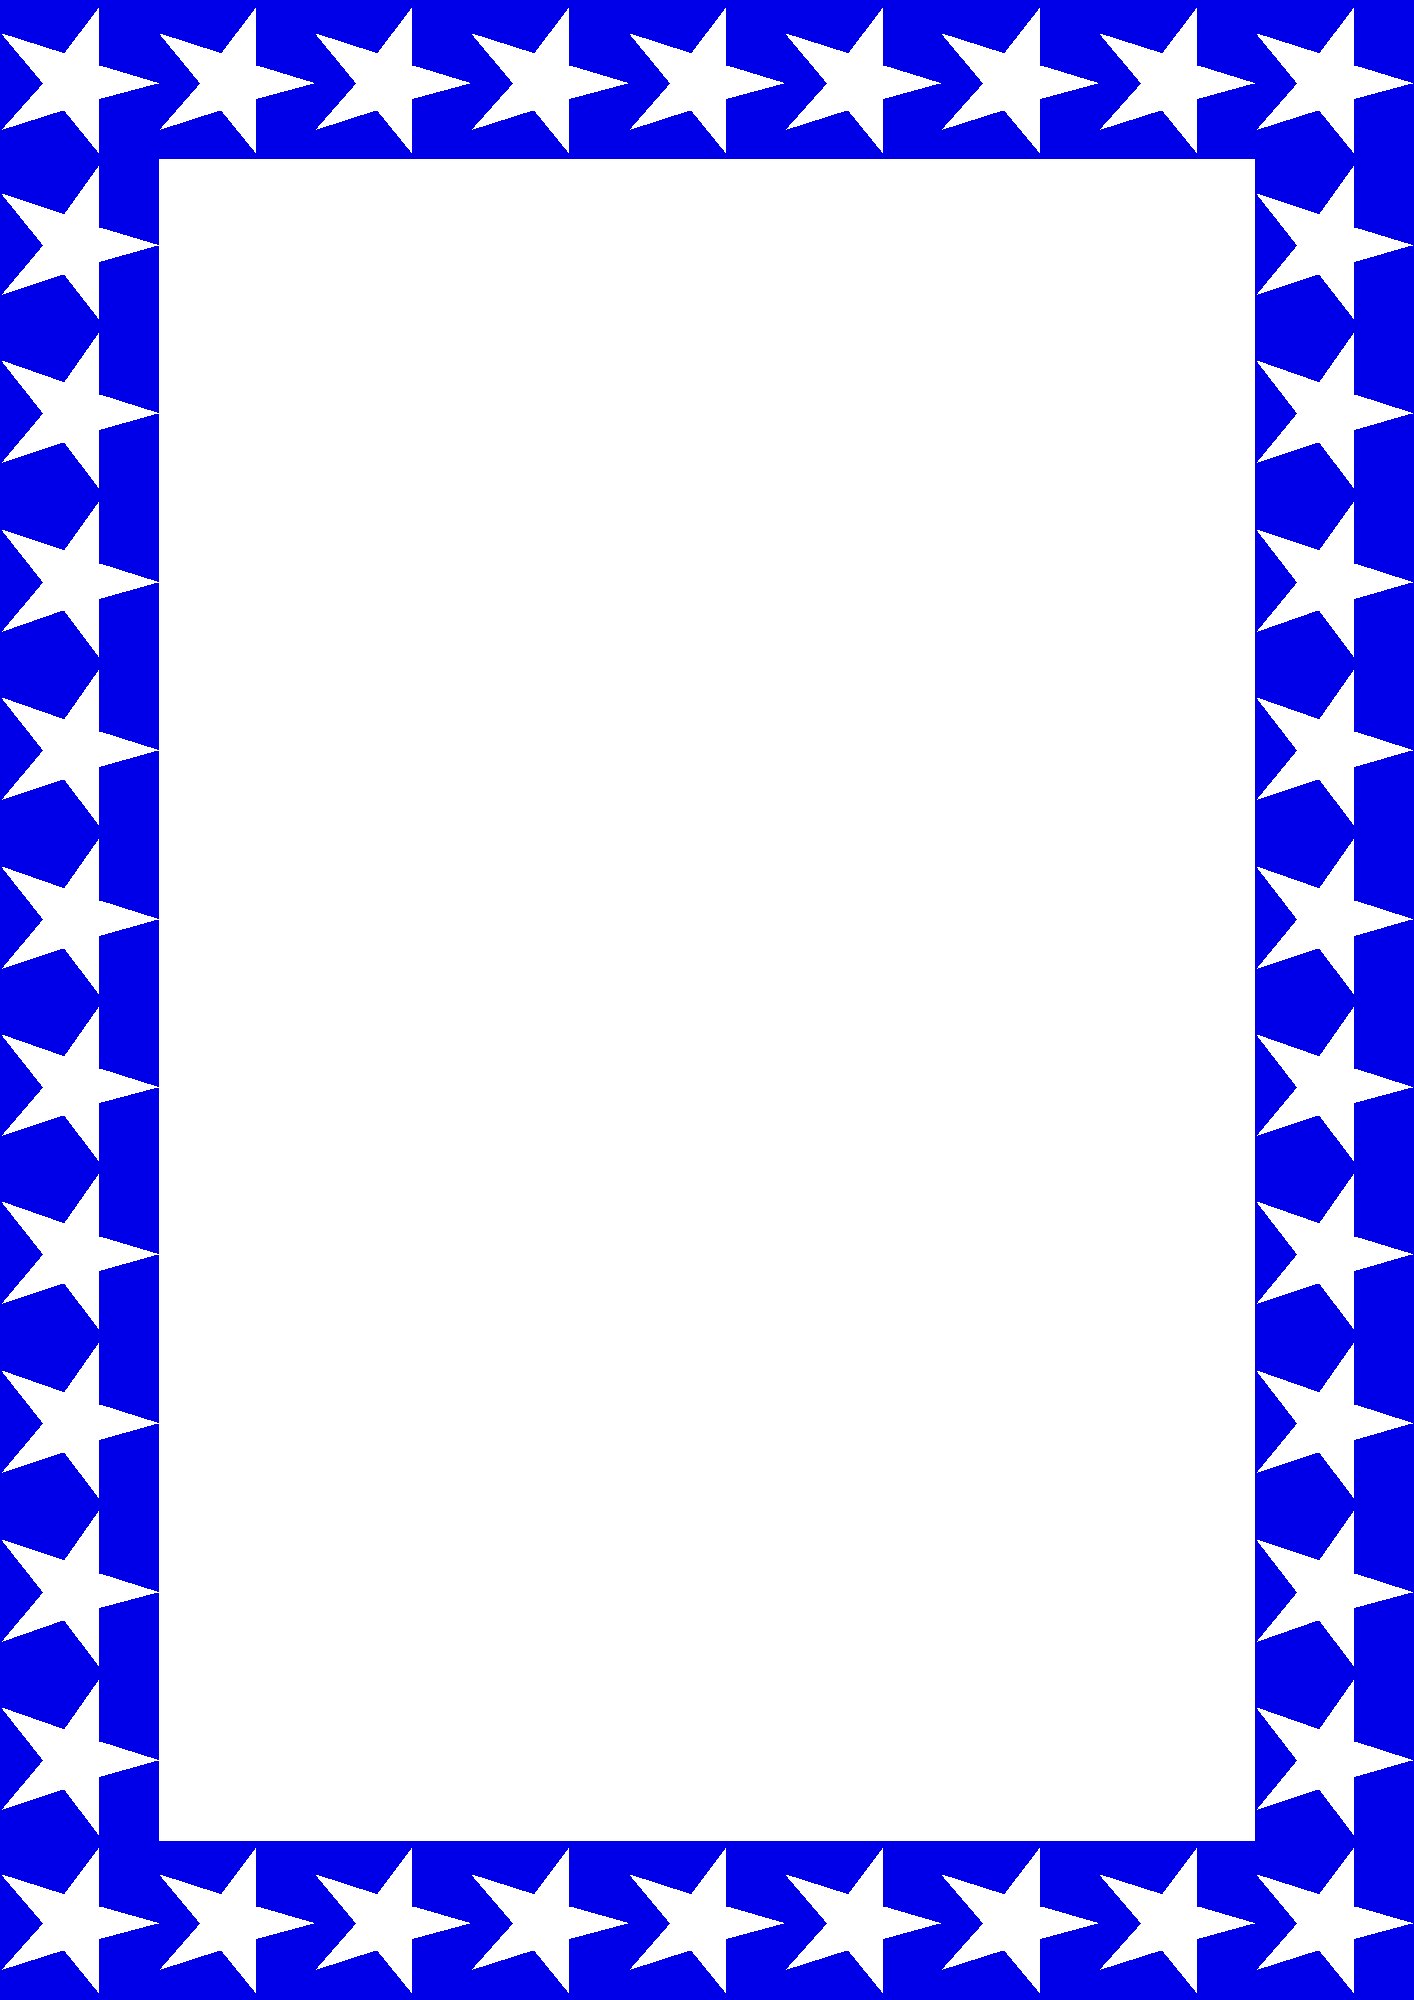 Free borders memorial day borders clipart WikiClipArt